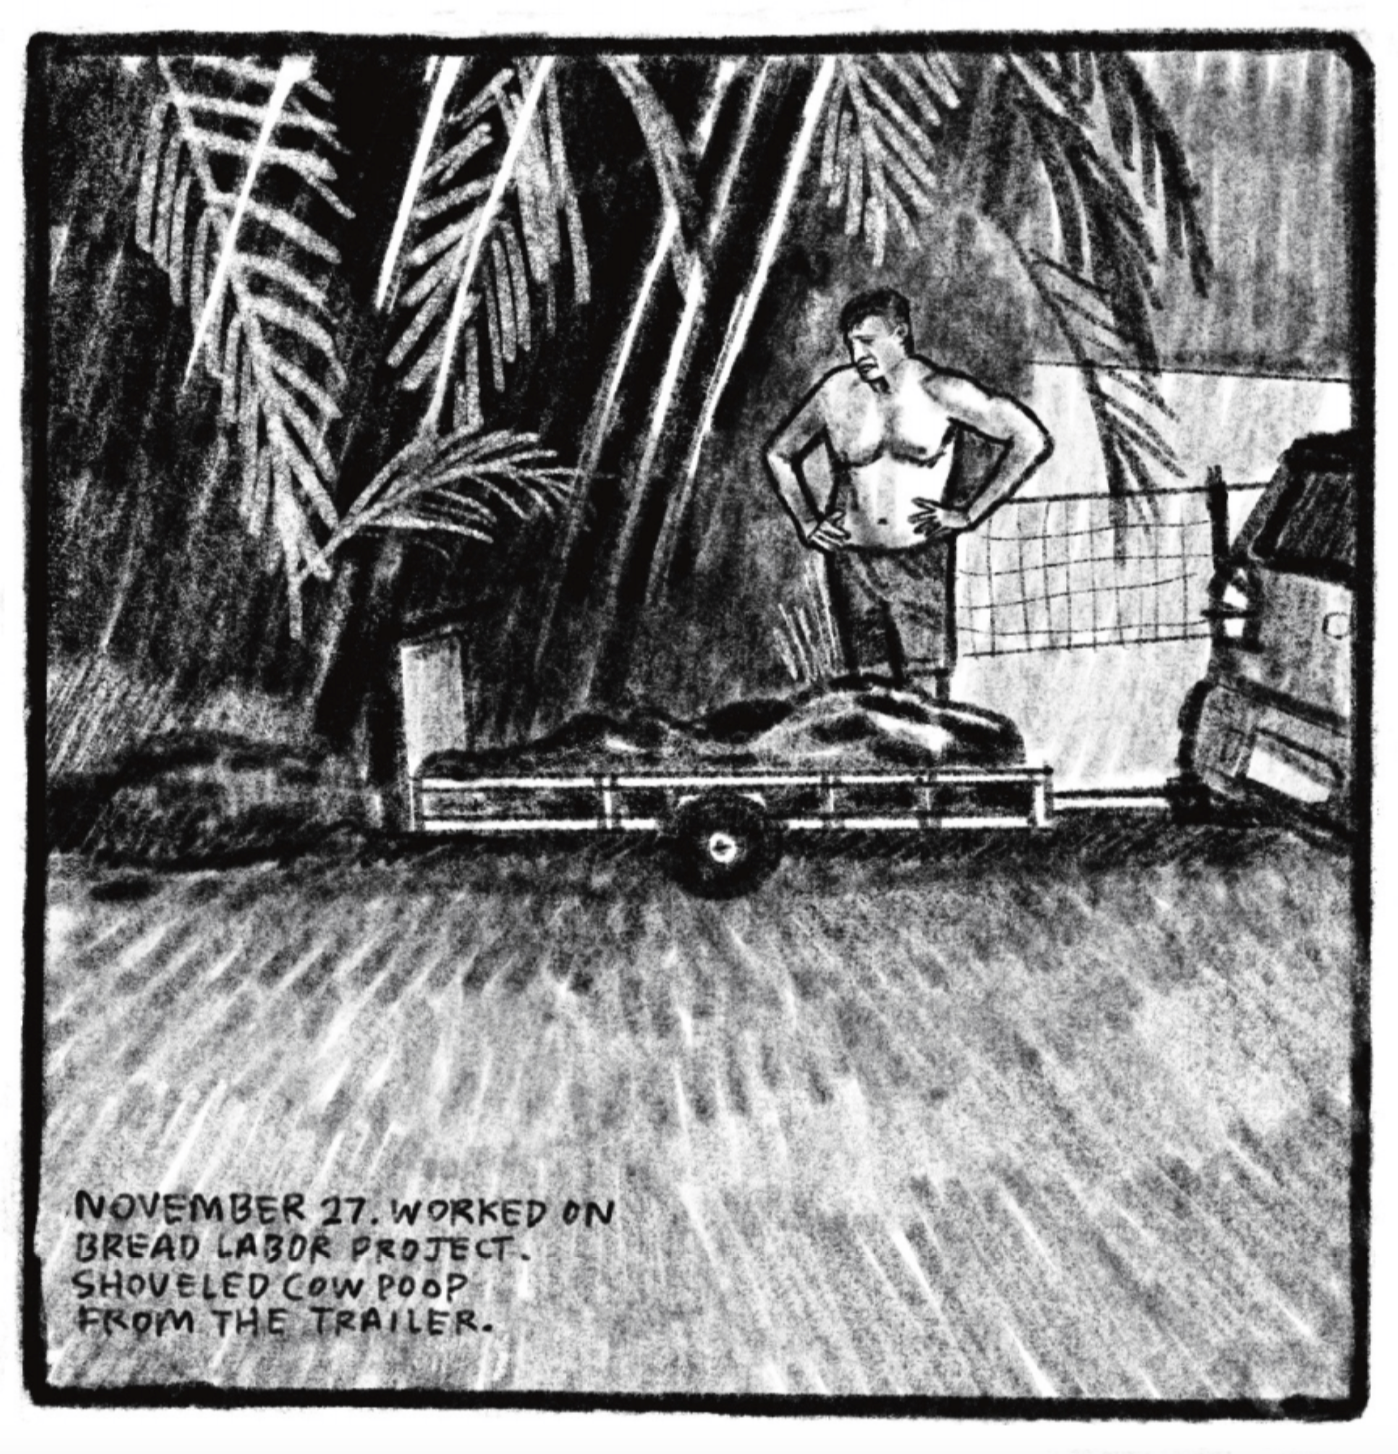 Outside, Tony, shirtless and in swim trunks or similar shorts, stands with hands on hips looking down at a car trailer heaped with cow poop. He is framed by palm fronds hanging overhead. â€œNovember 27. Worked on bread labor project. Shoveled cow poop from the trailer.â€